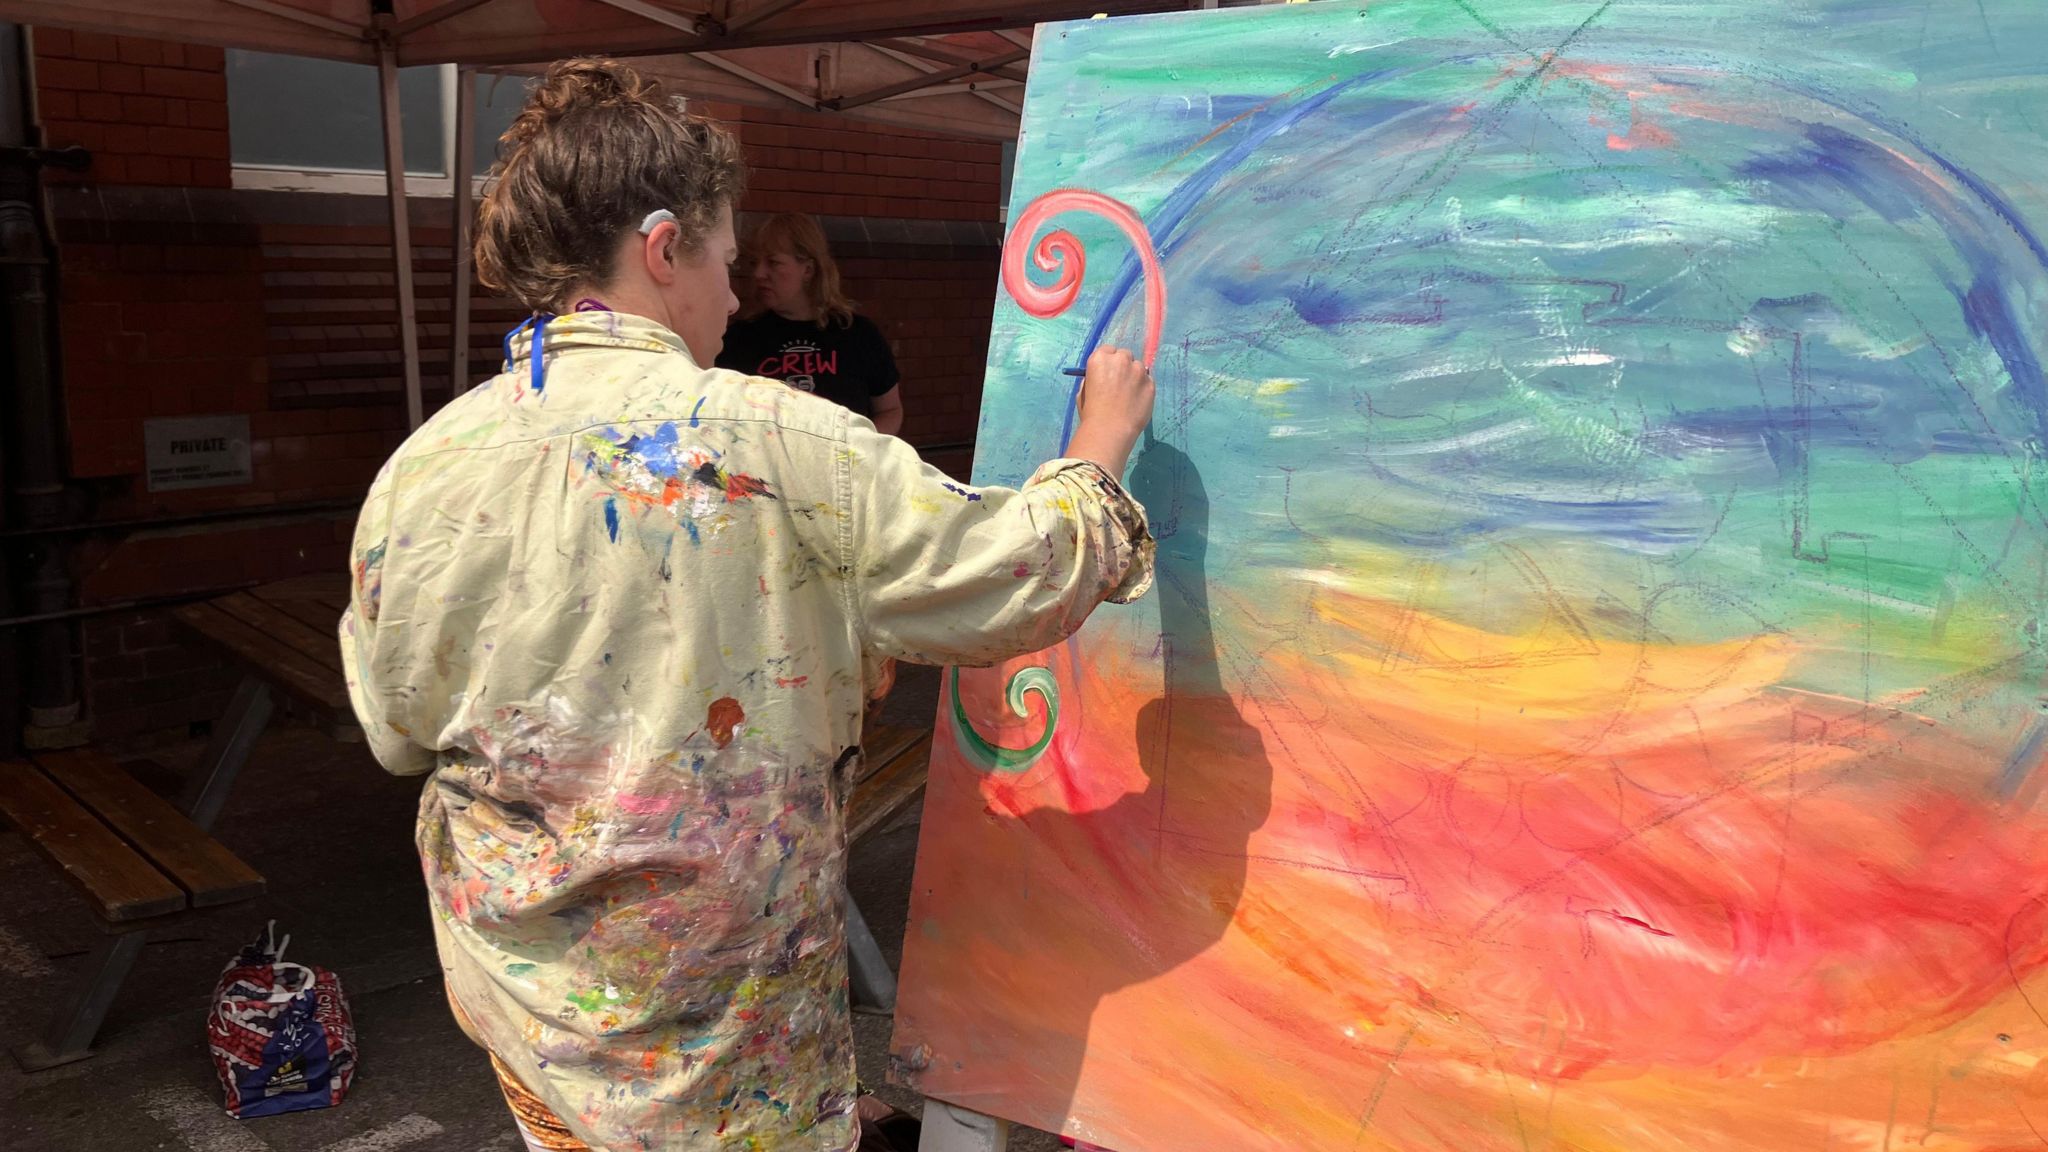 An artist painting on an orange and blue green canvas